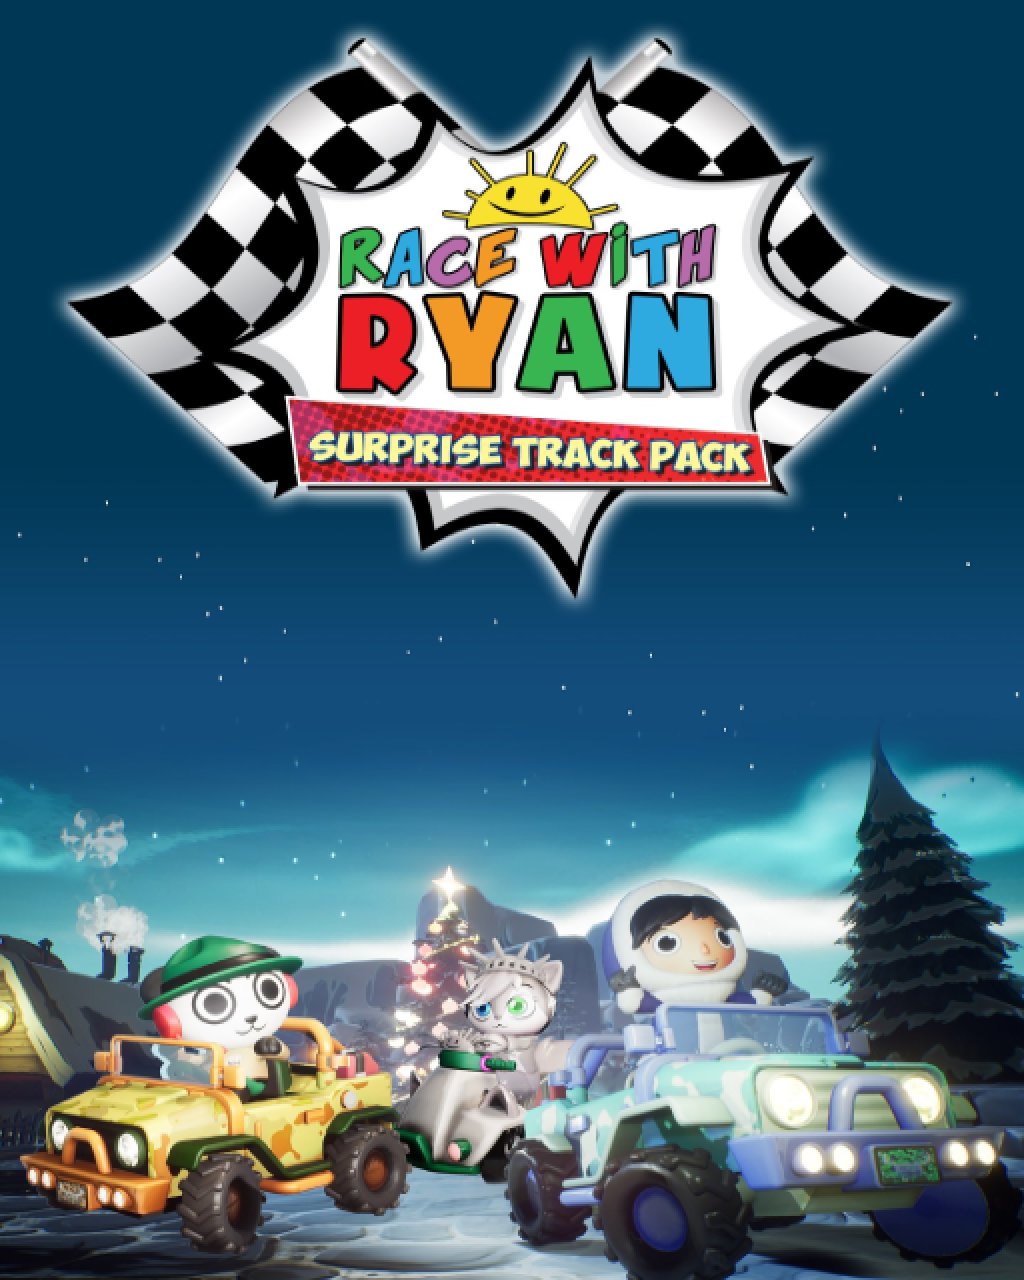 Race with Ryan Surprise Track Pack